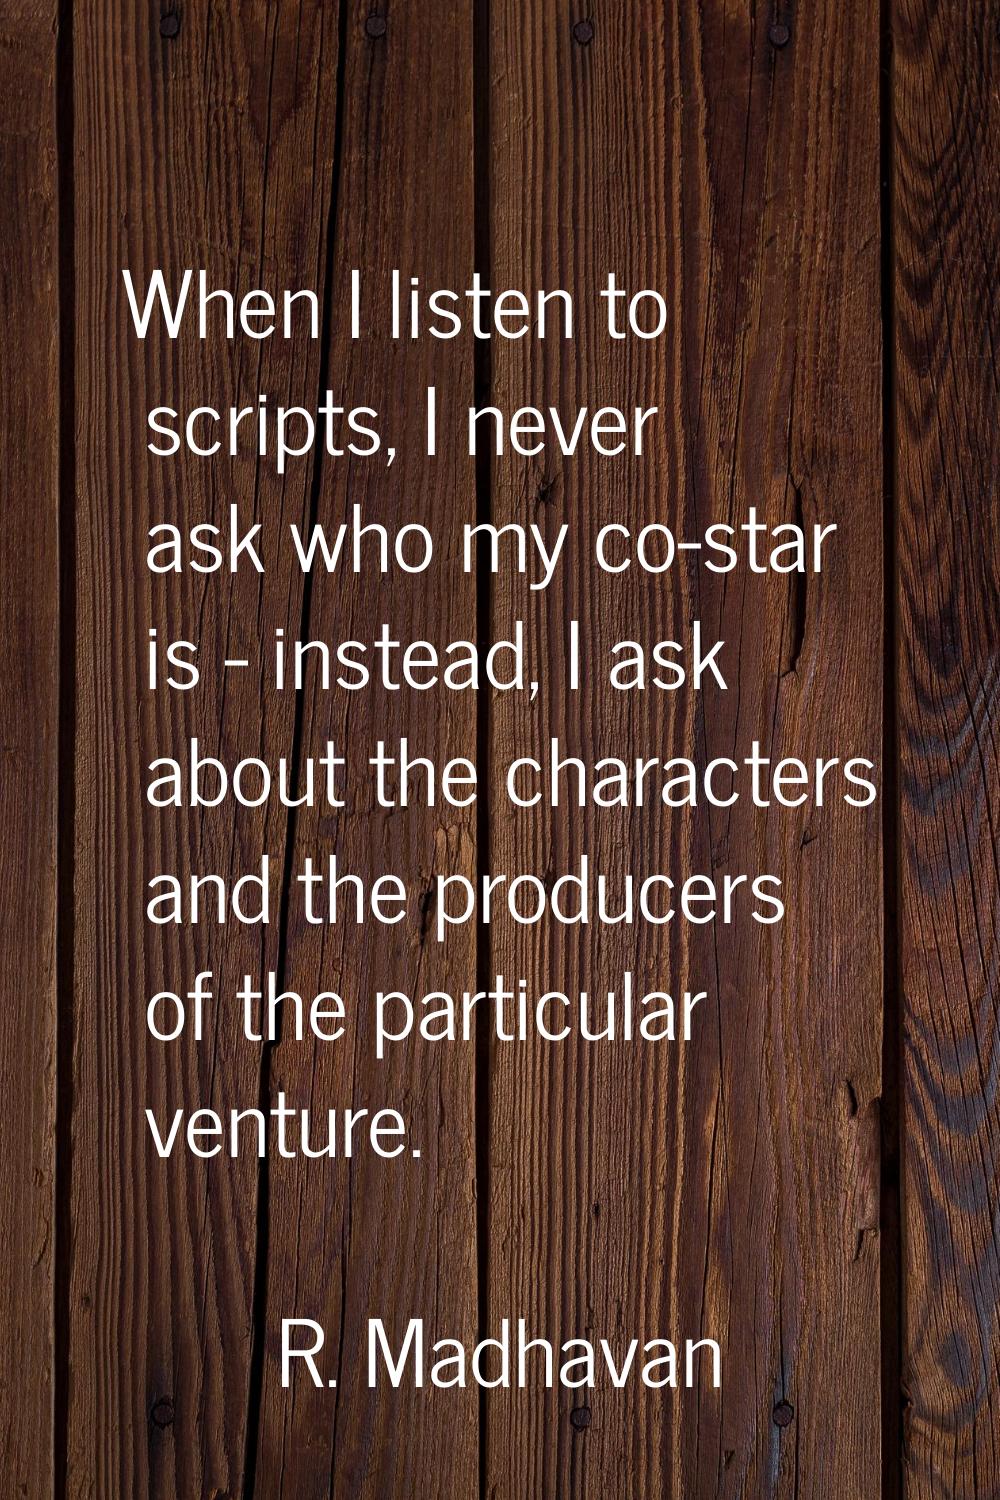 When I listen to scripts, I never ask who my co-star is - instead, I ask about the characters and t